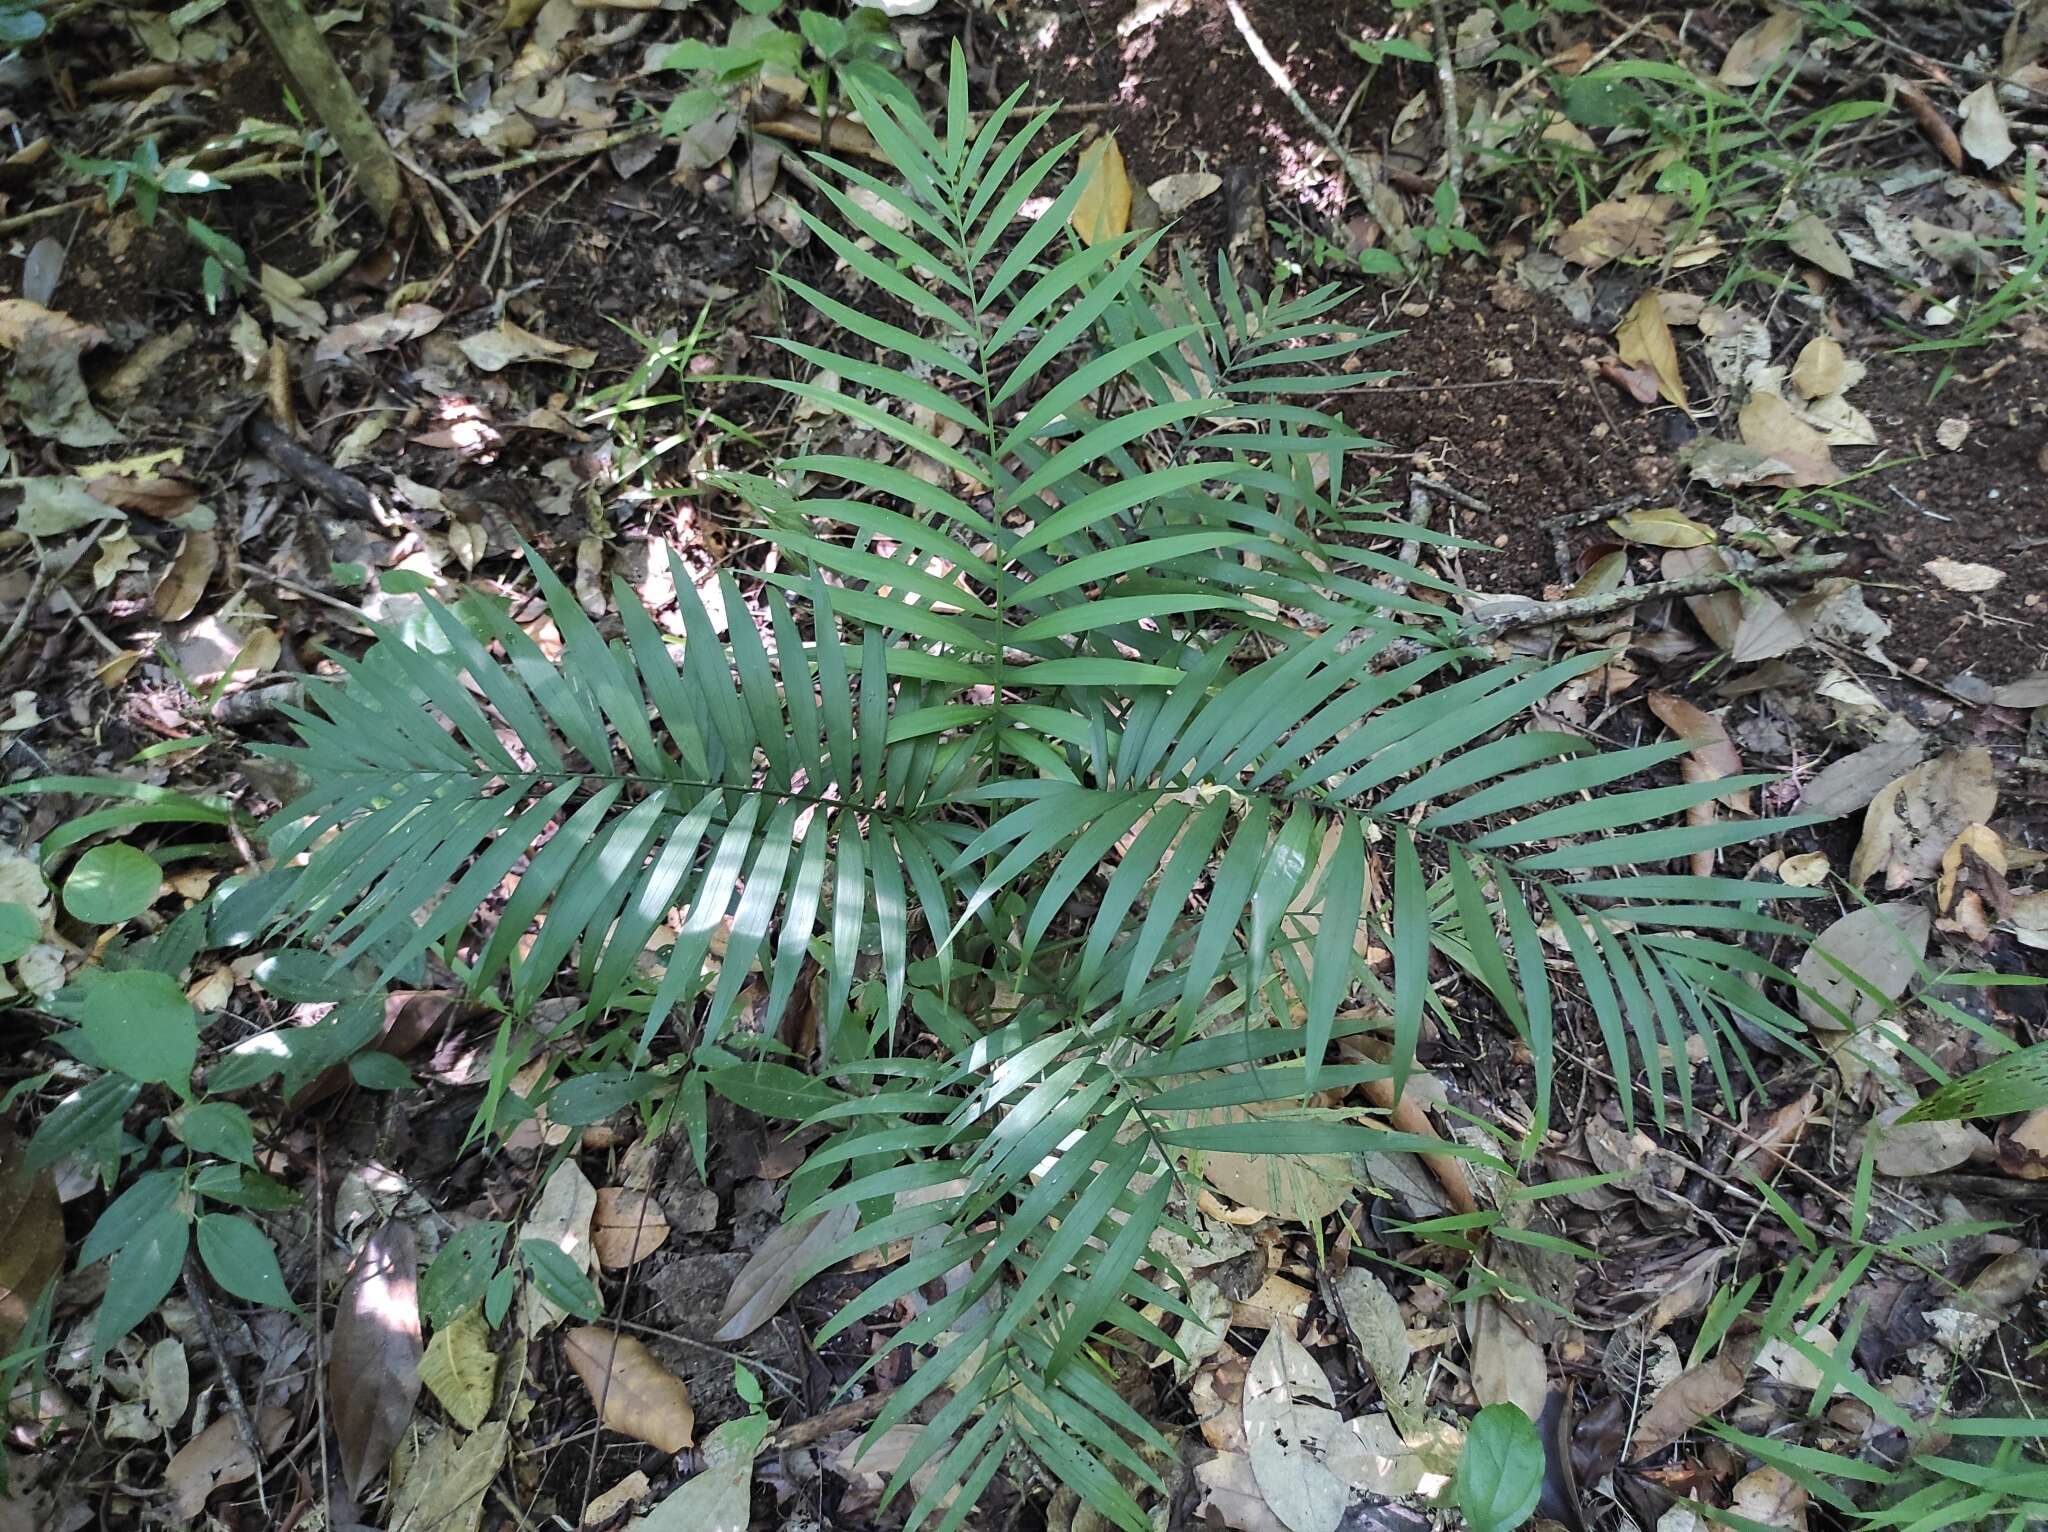 Image of parlor palm